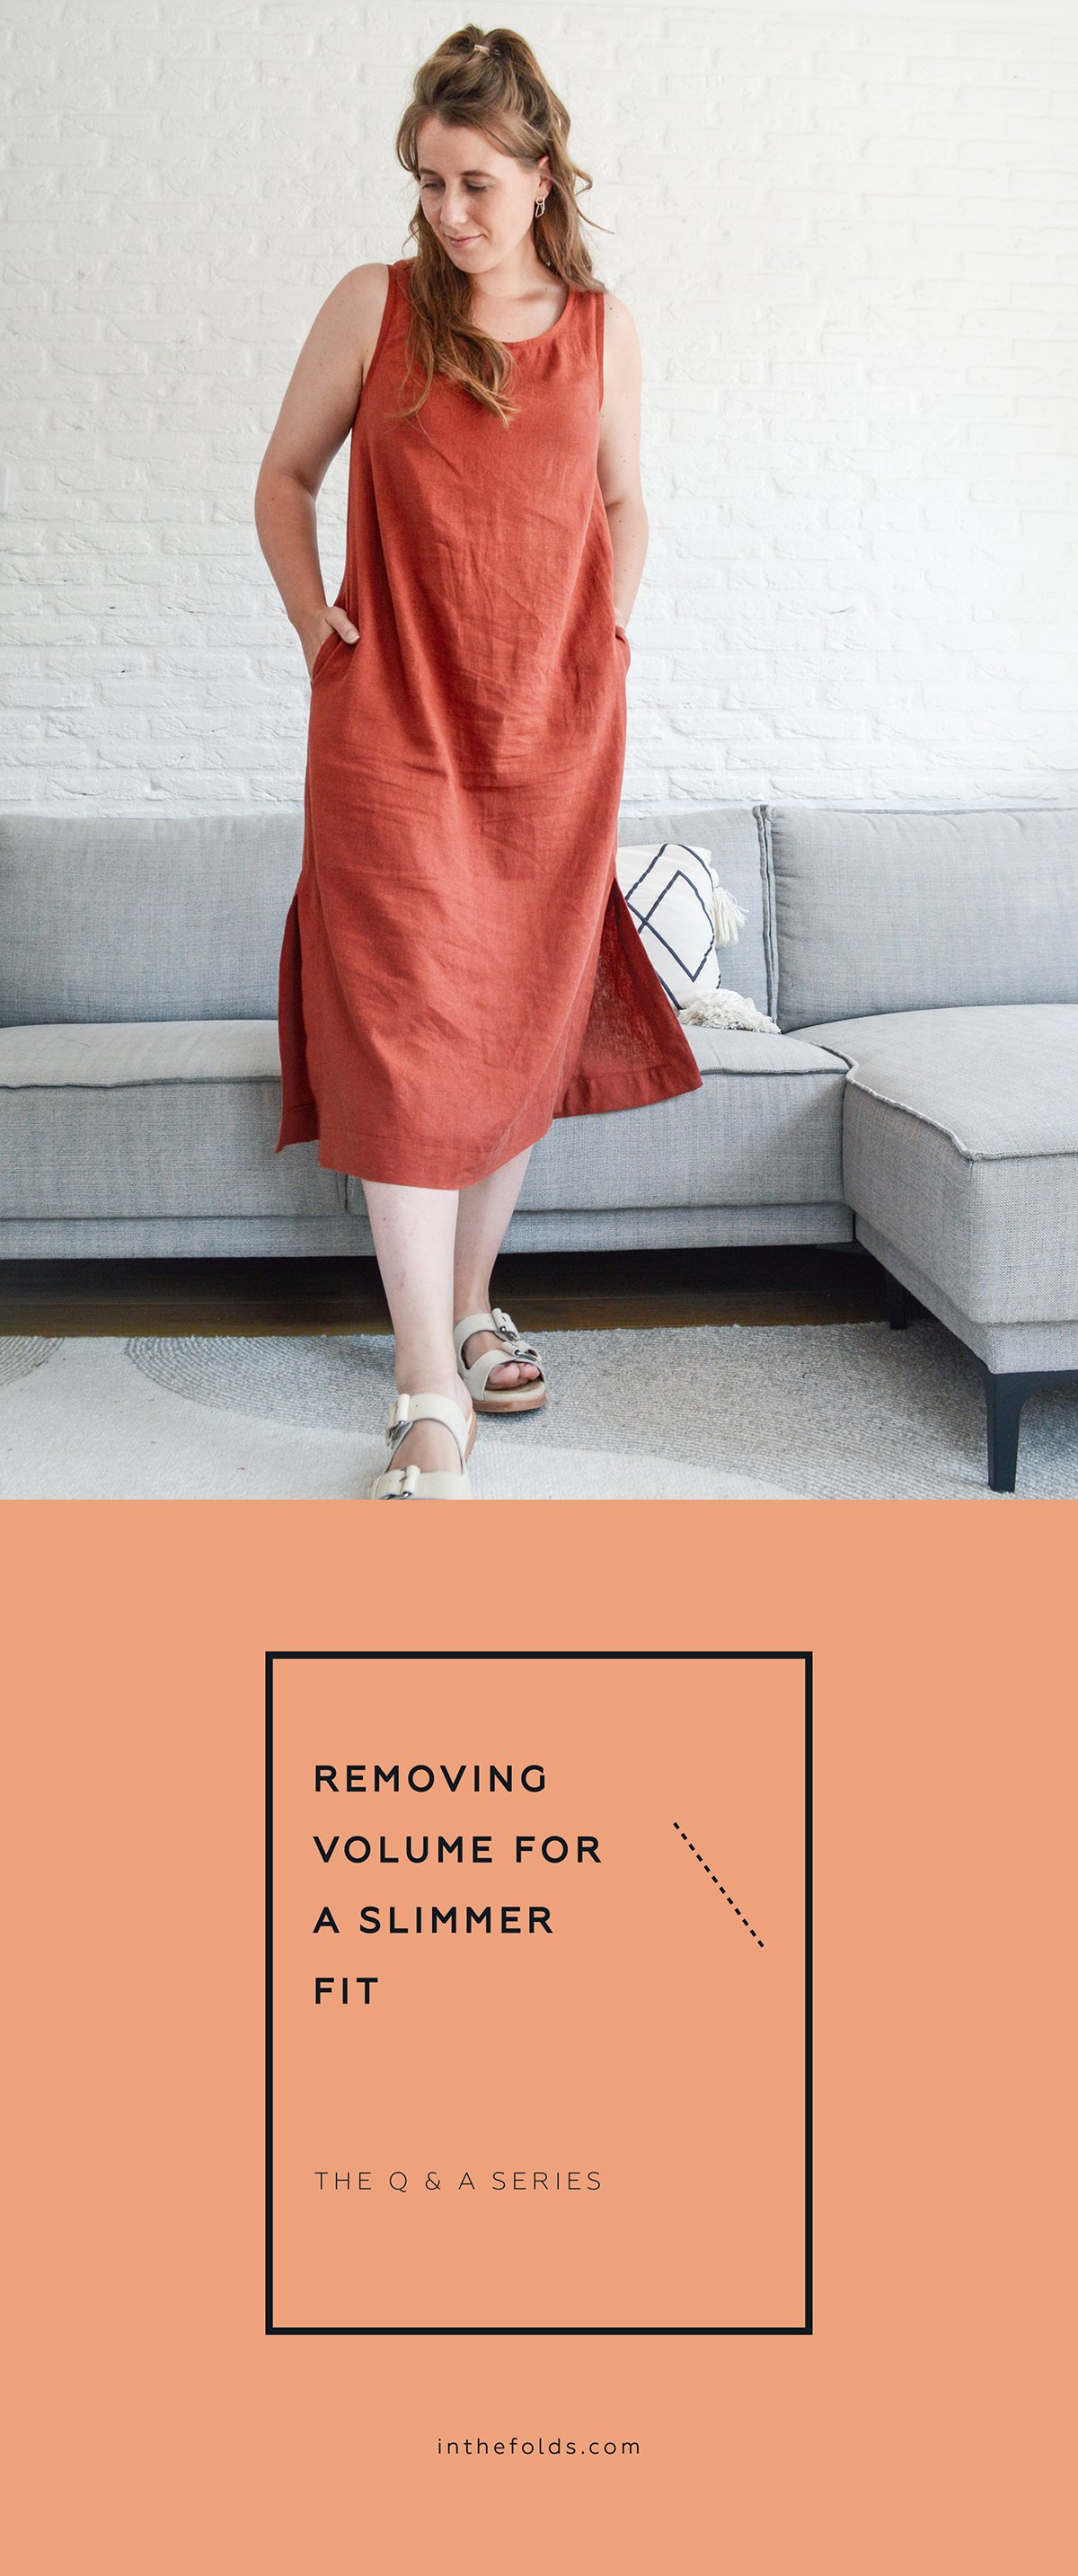 Remove dress volume for slimmer fit — In the Folds